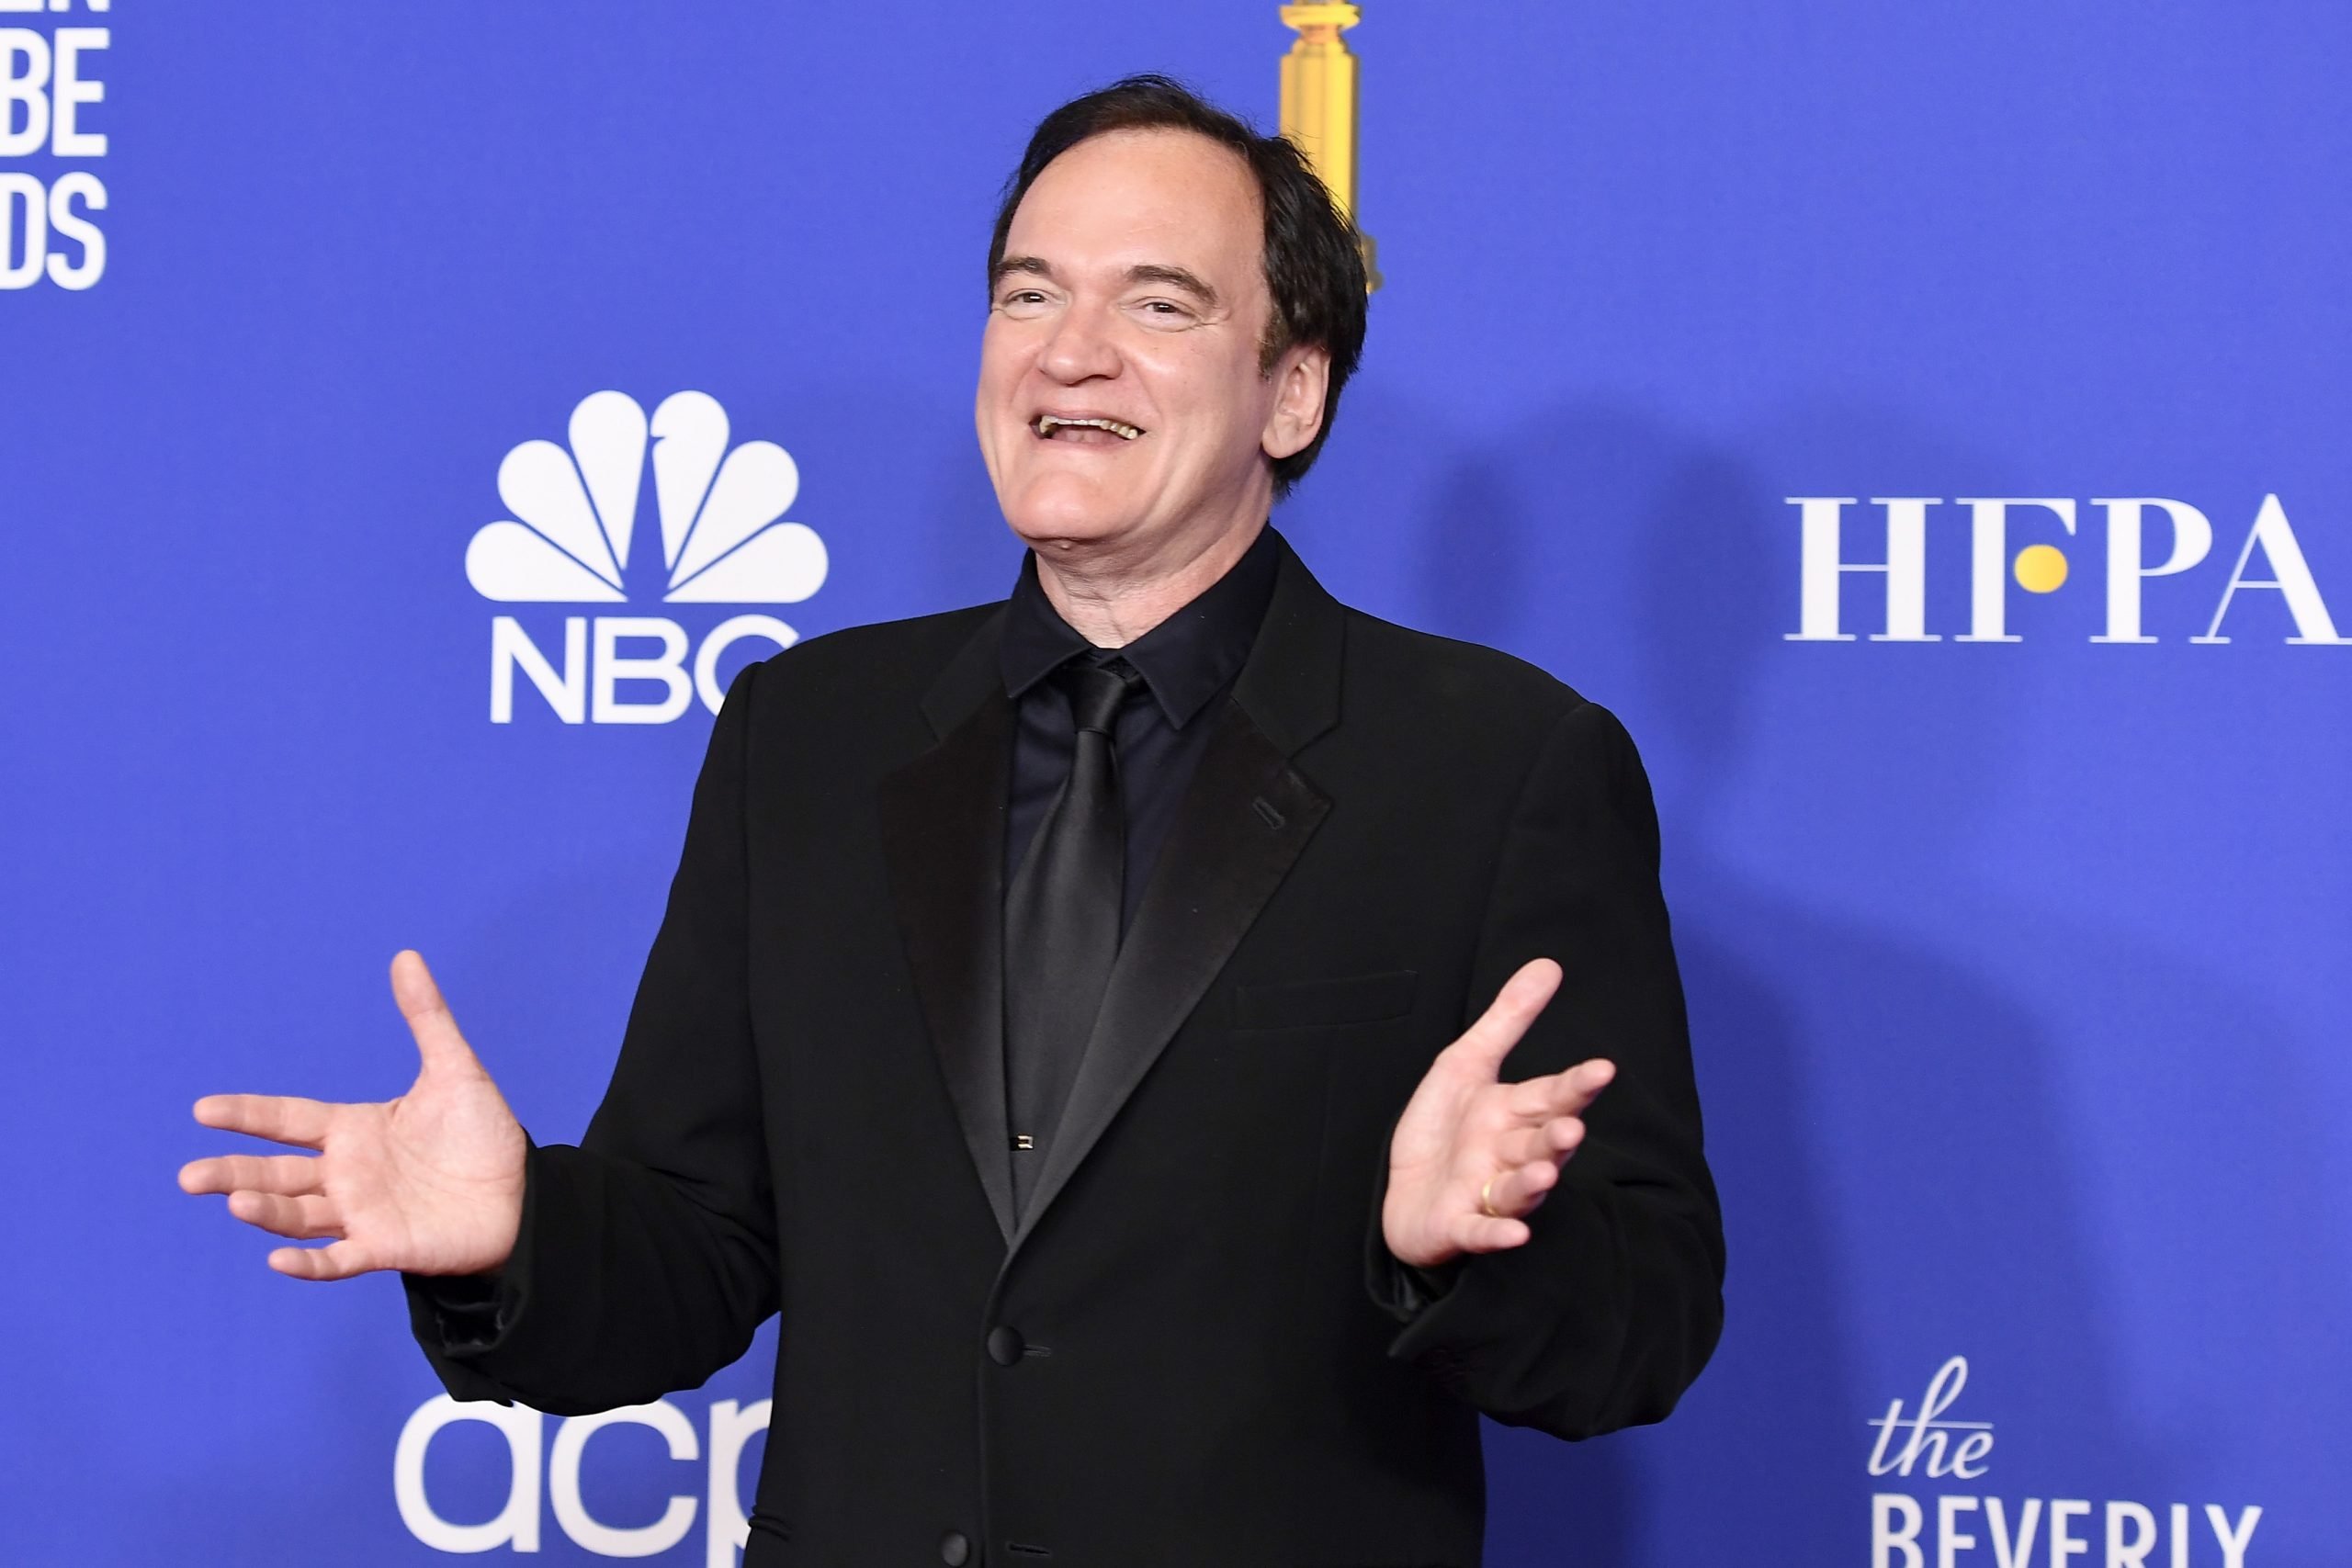 Quentin Tarantino Can’t Escape the Minions as ‘Despicable Me 2’ Is the First Movie He Shows His Son